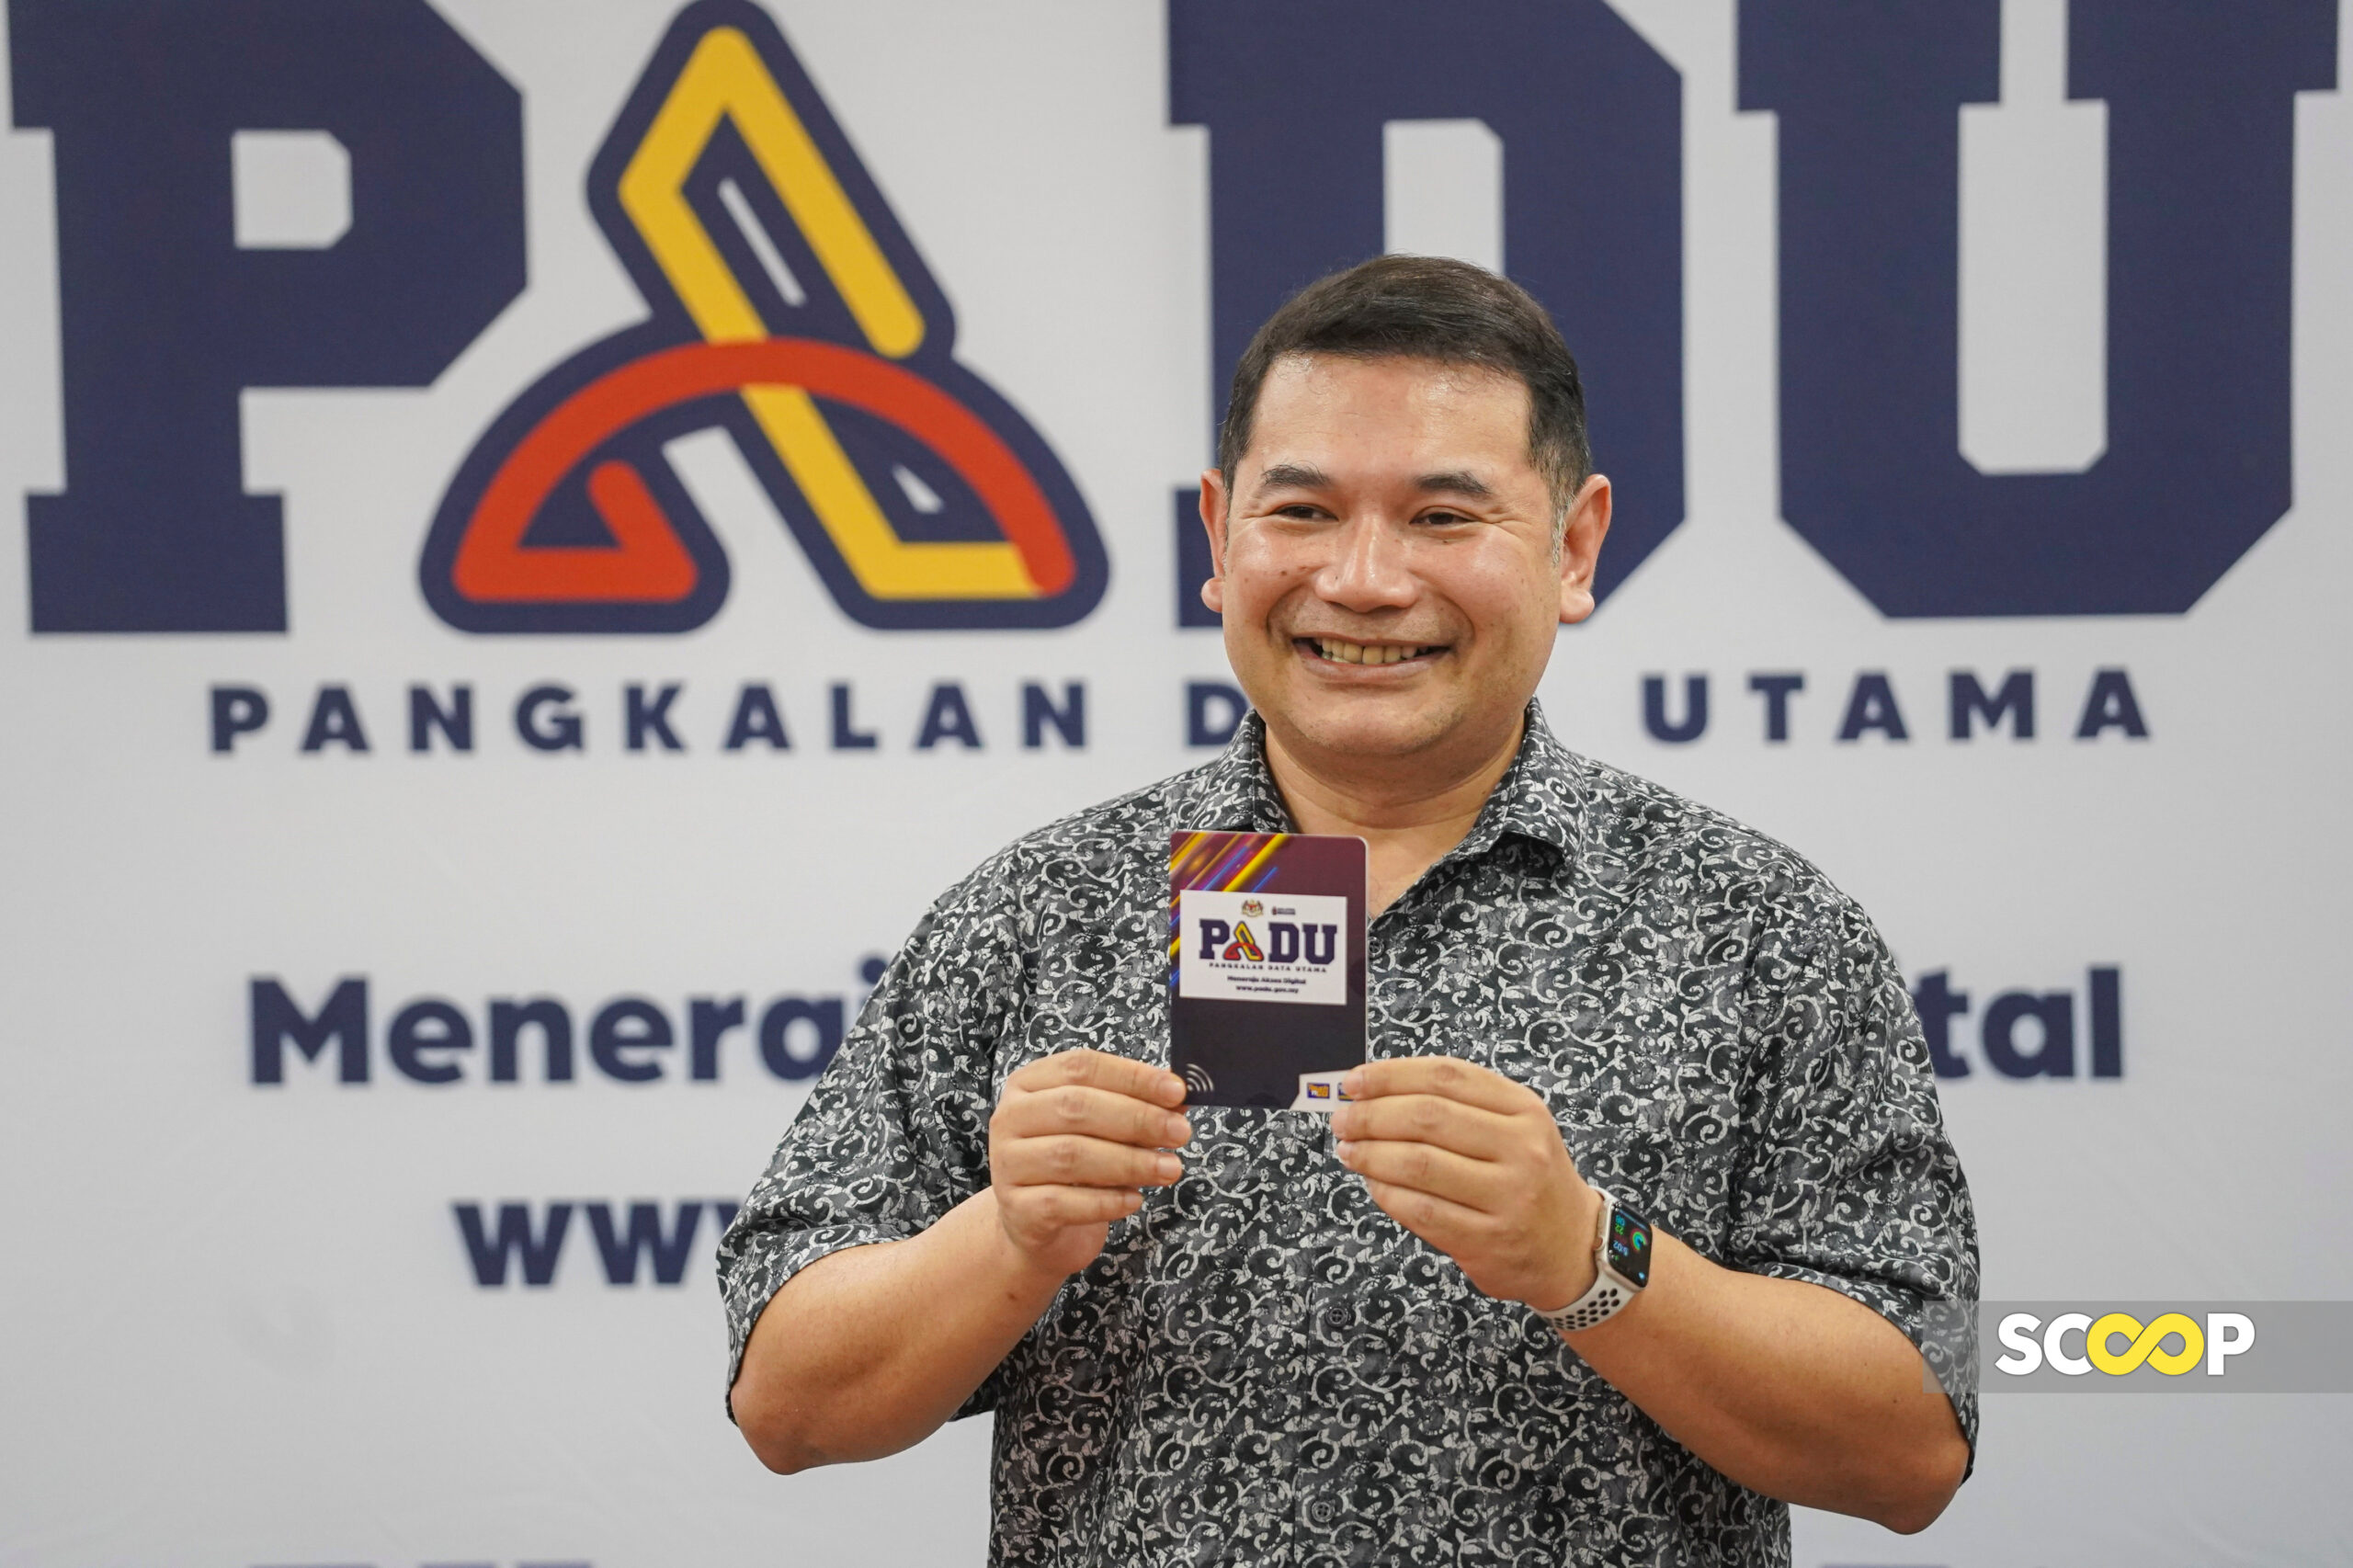 [UPDATED] First 3,000 to register with Padu to get free NFC-equipped TnG cards